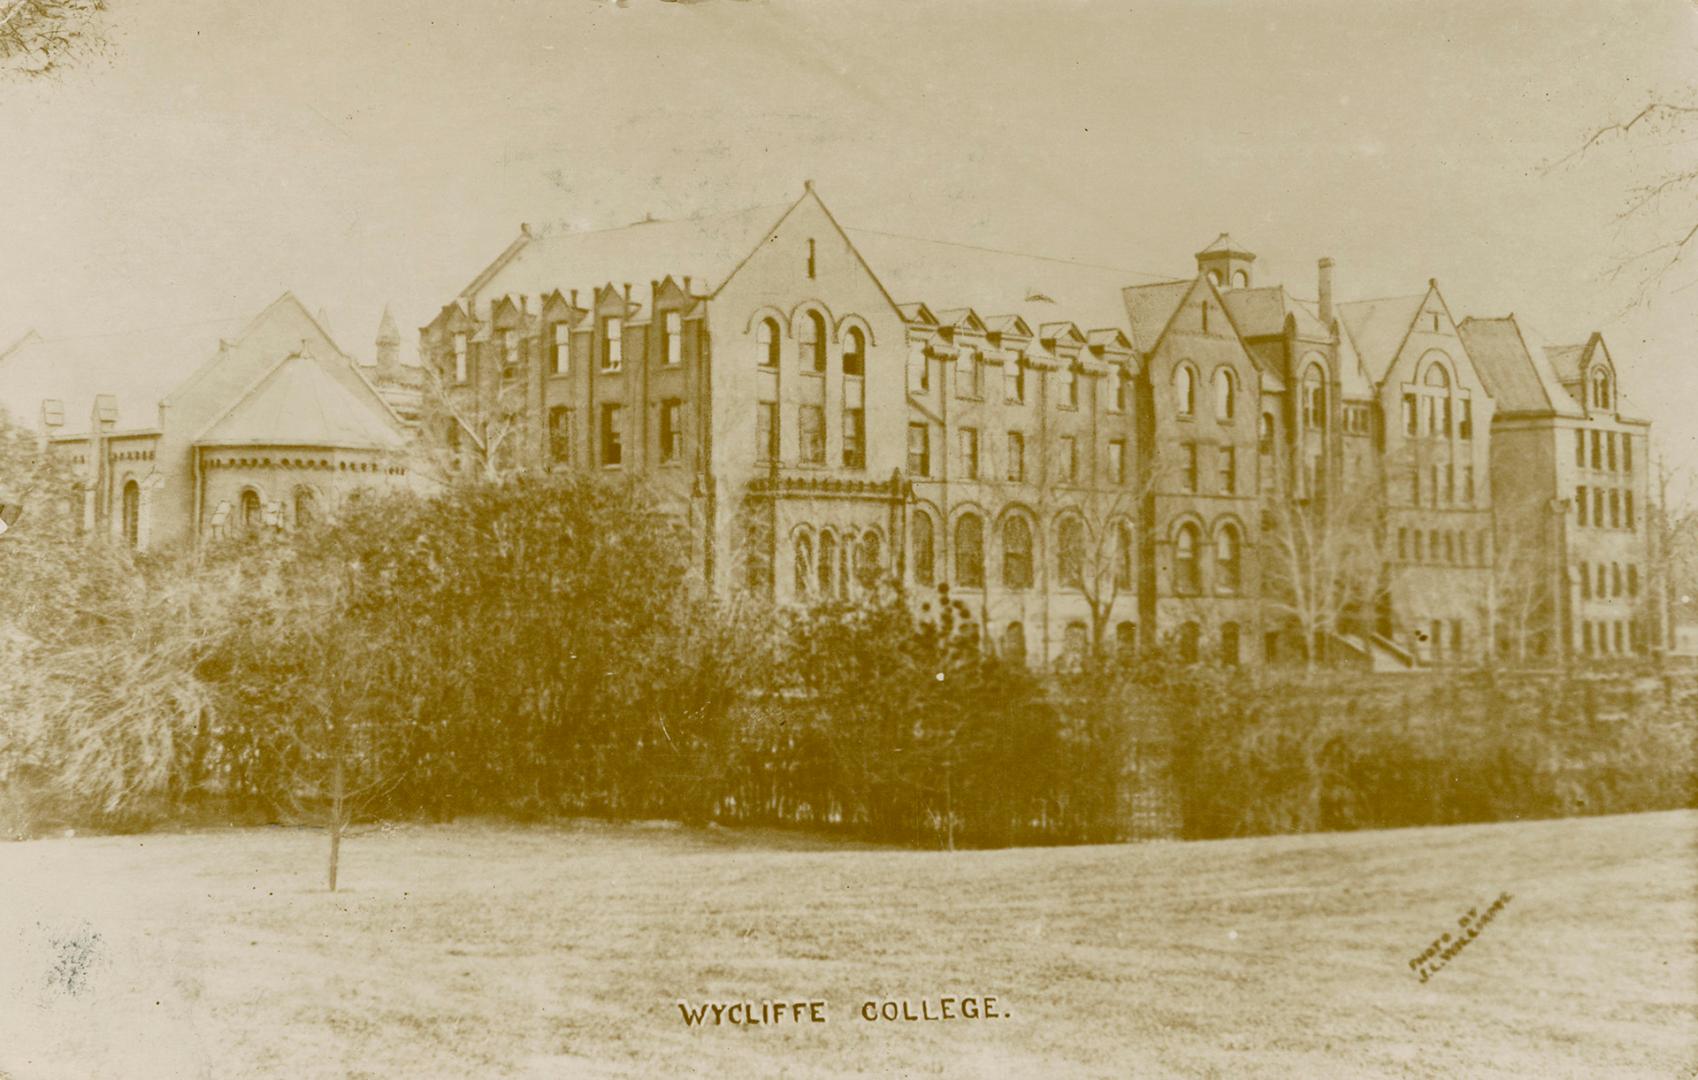 Black and white photograph of a very large collegiate building.